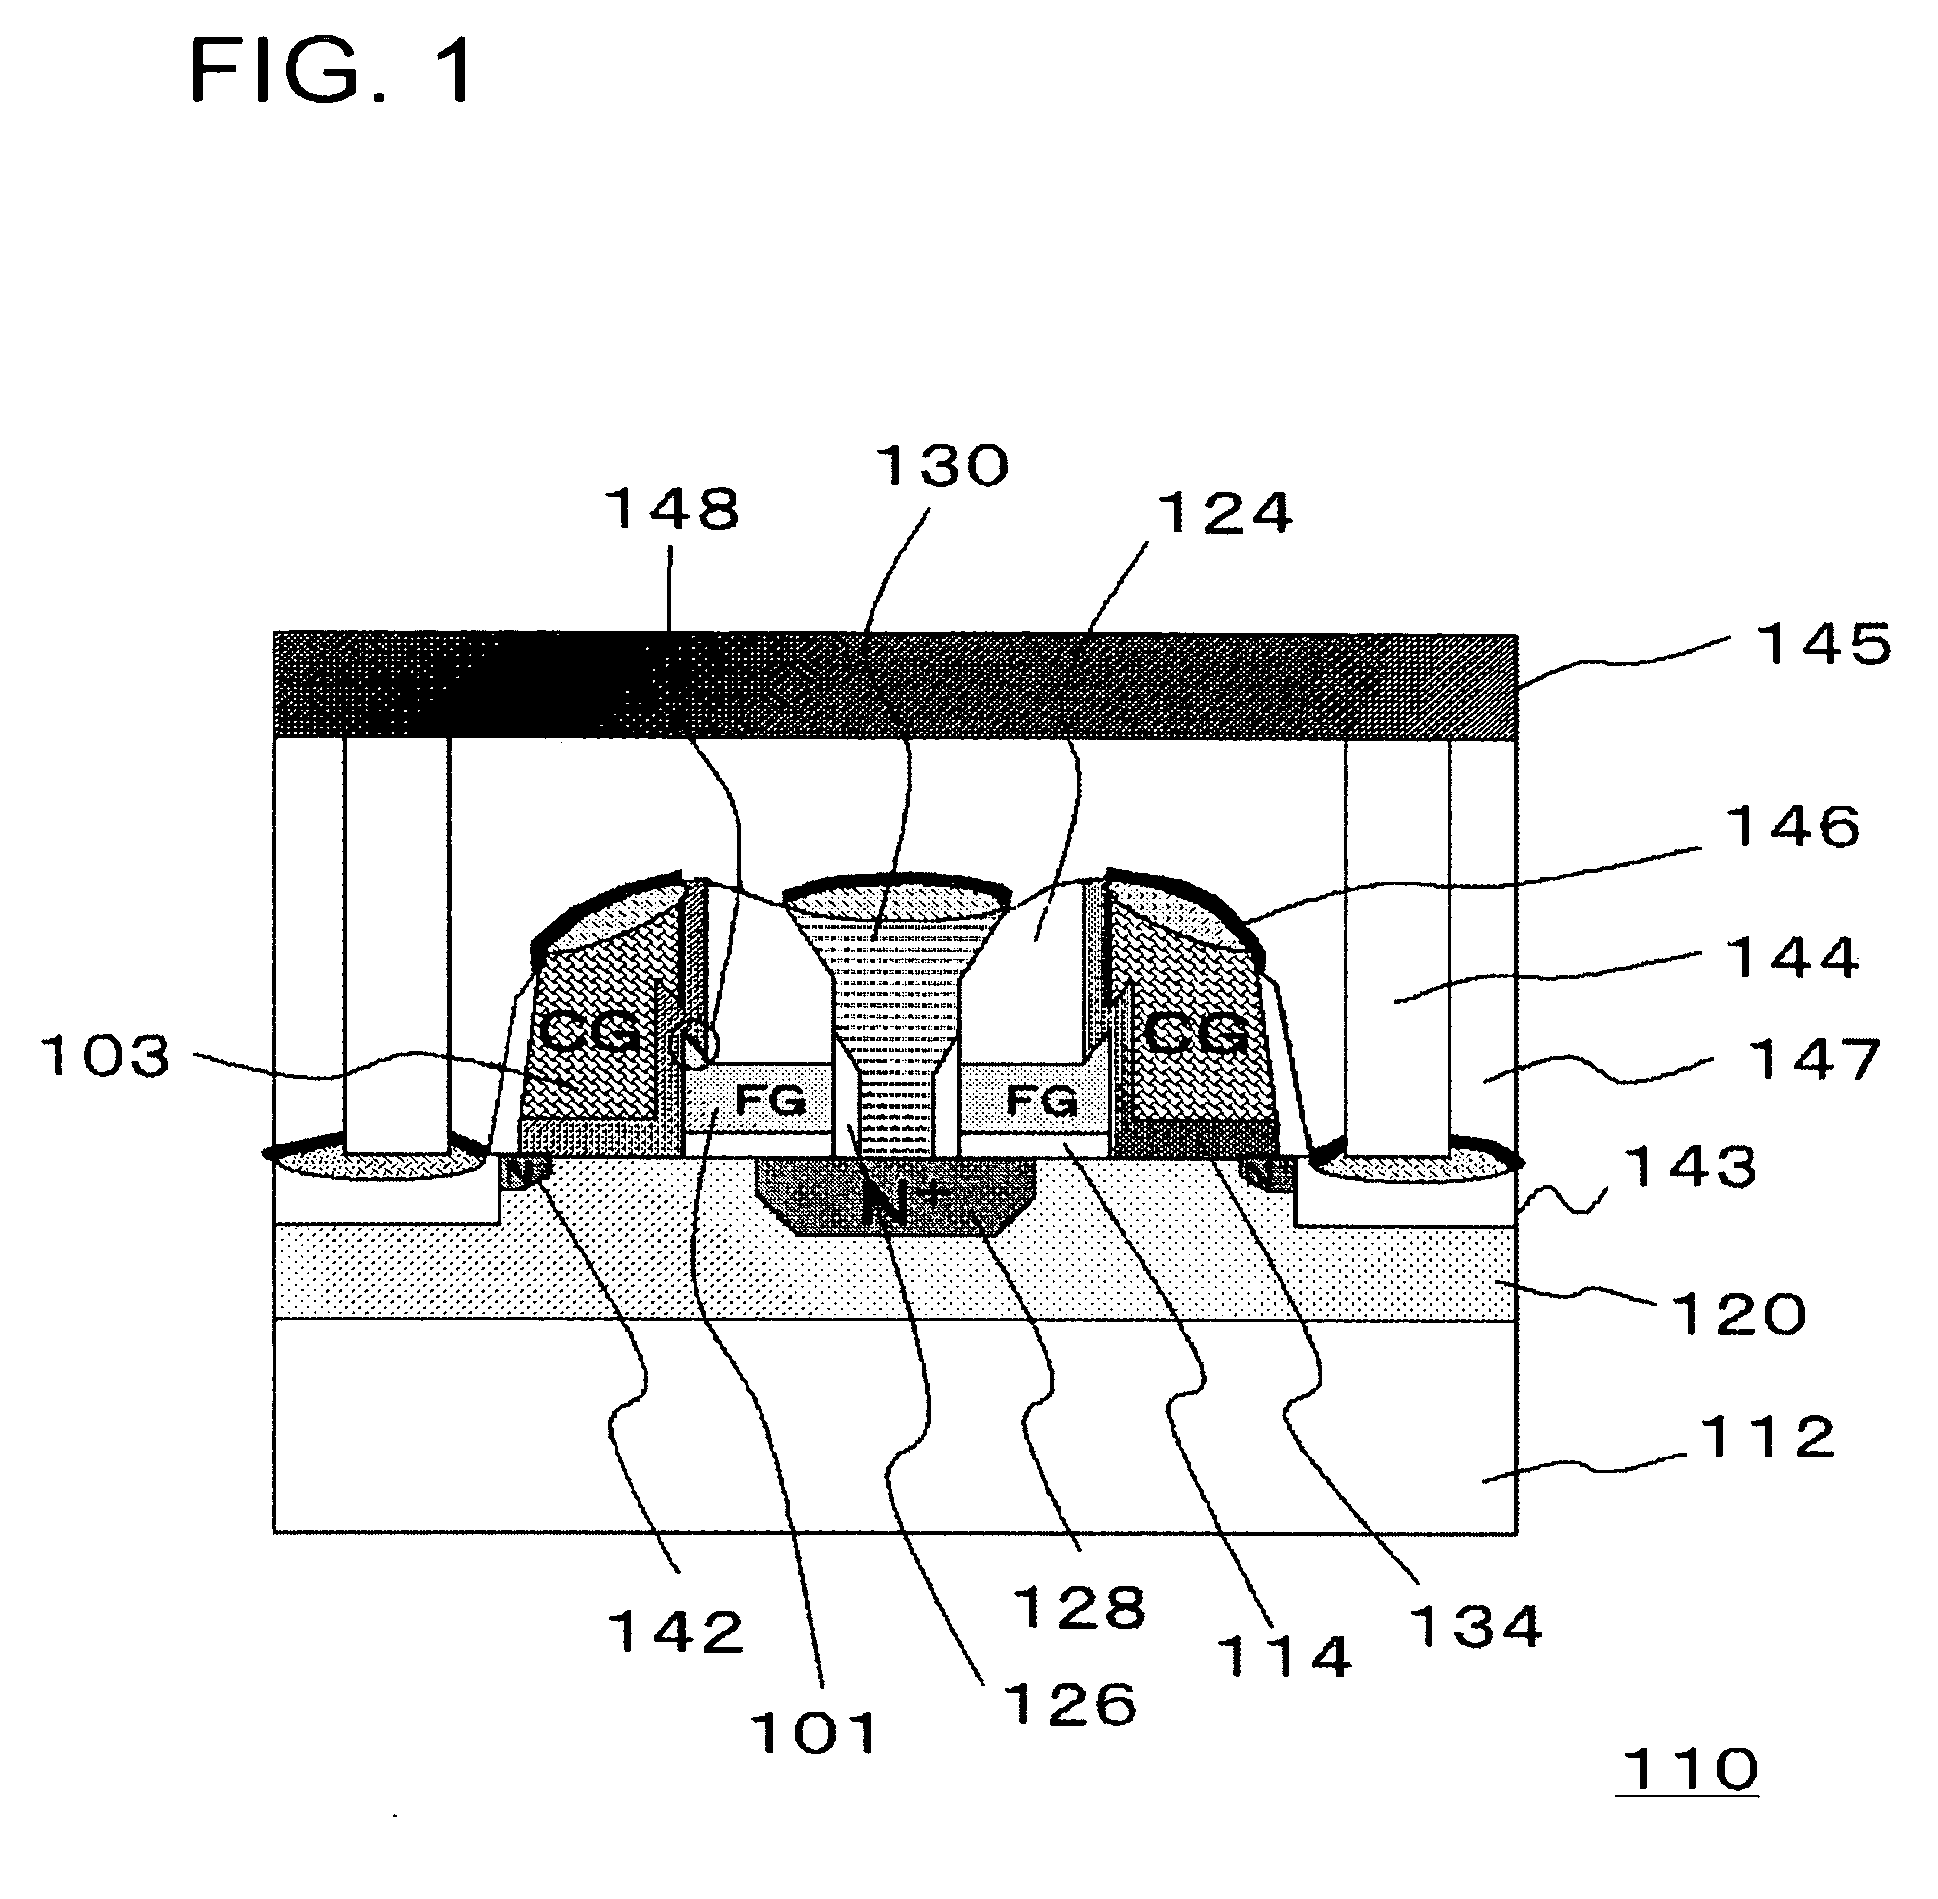 Method of fabricating a non-volatile memory element